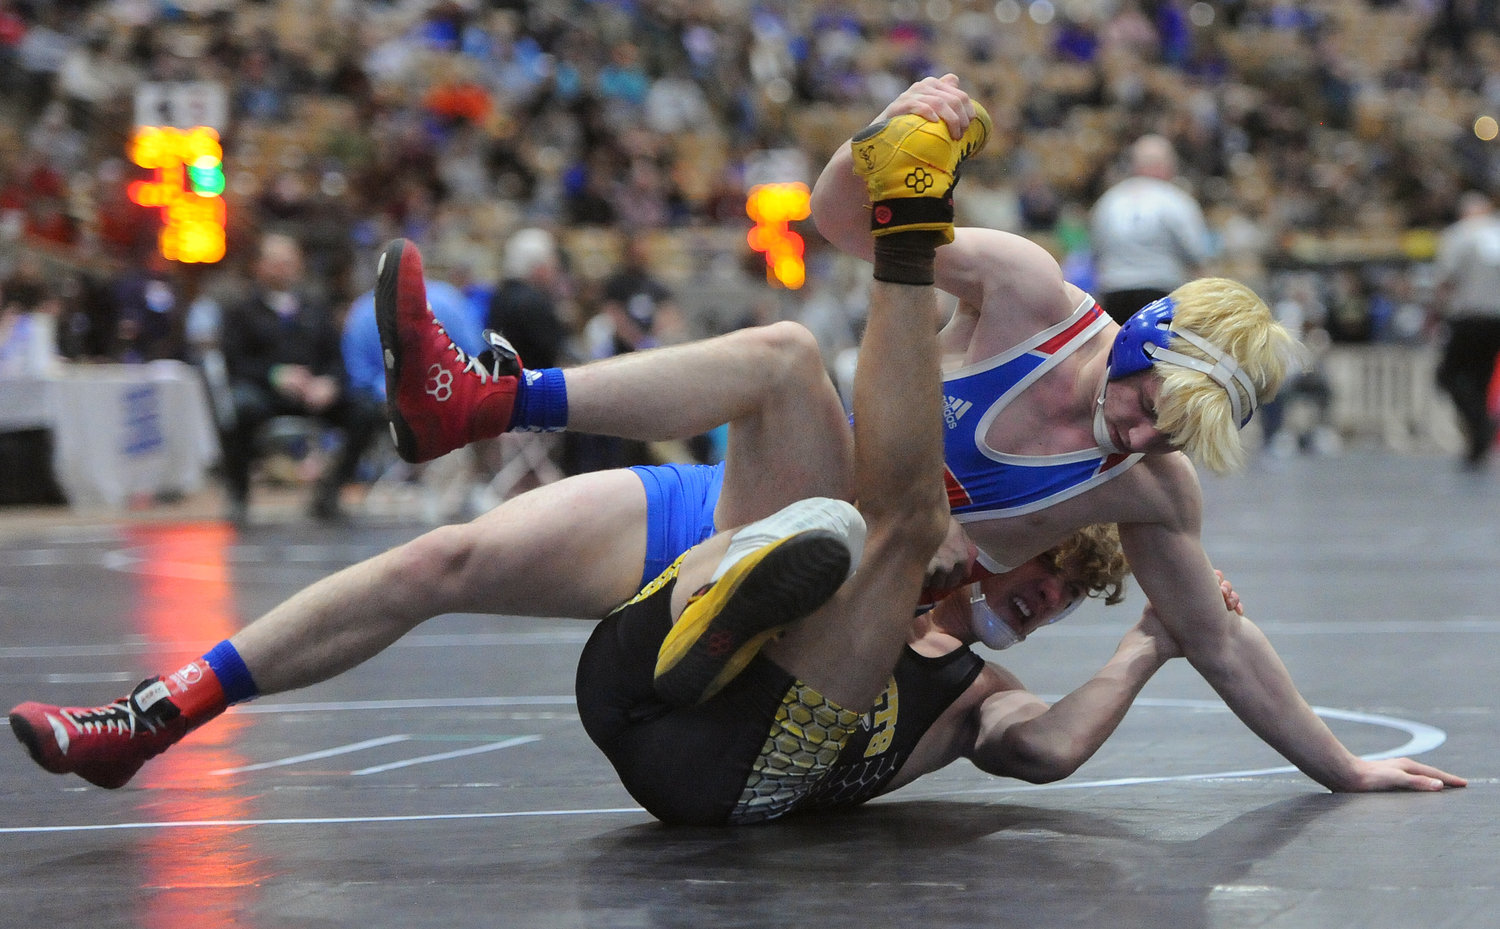 Seth McCoy repositions and goes in for the pin against Fairview’s Blake Mitchell in the opening round of the 145-pound weight class.